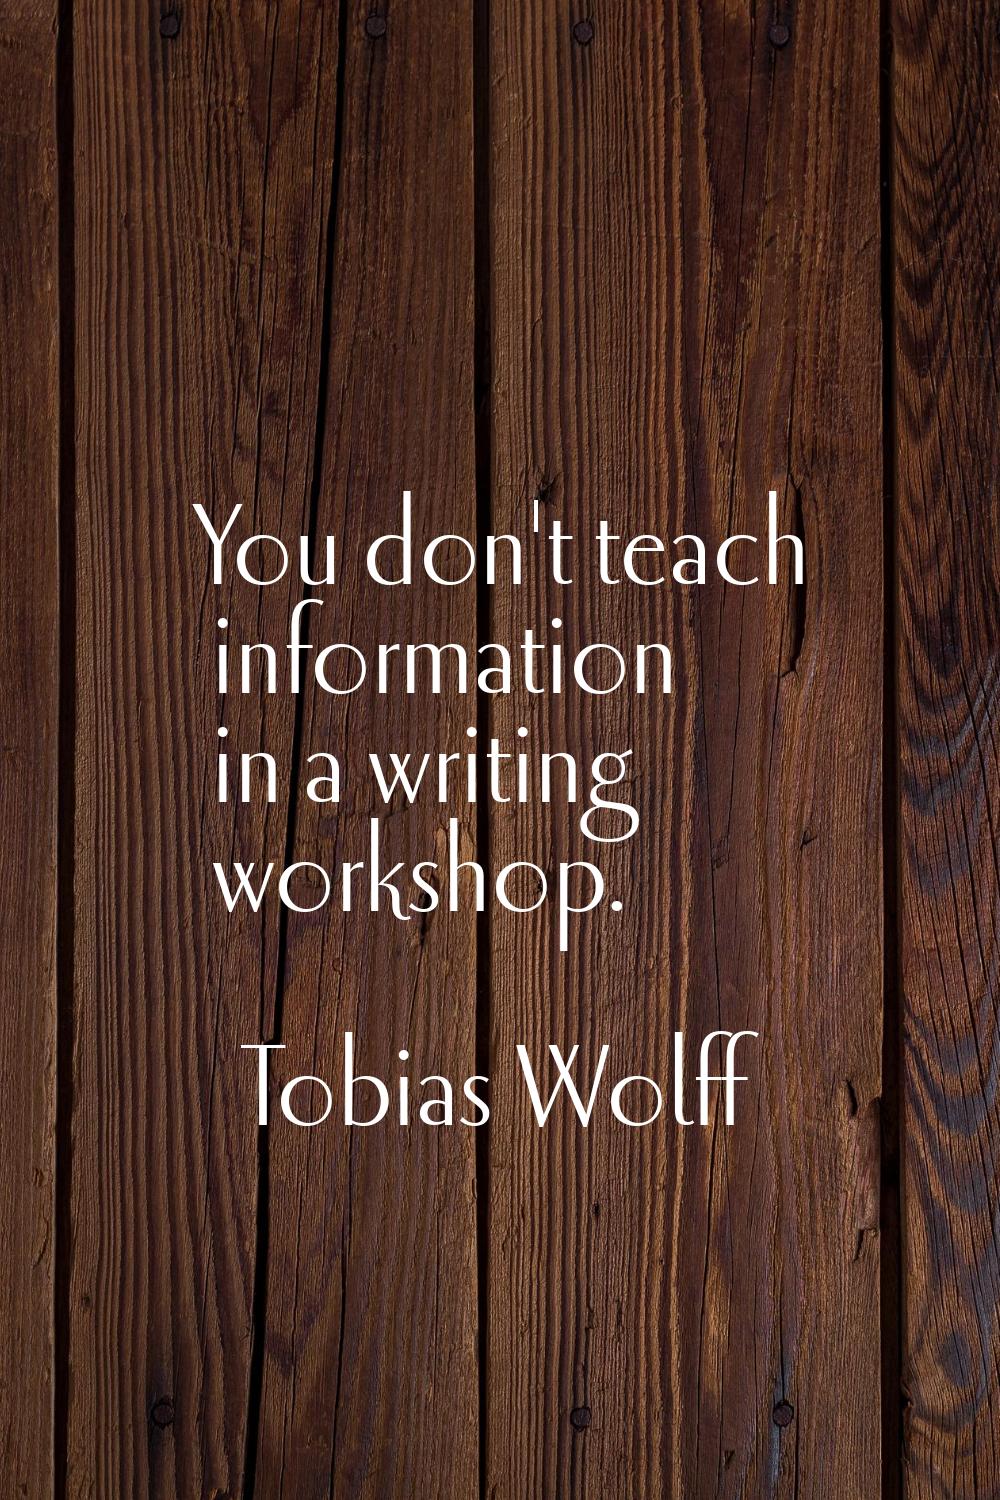 You don't teach information in a writing workshop.